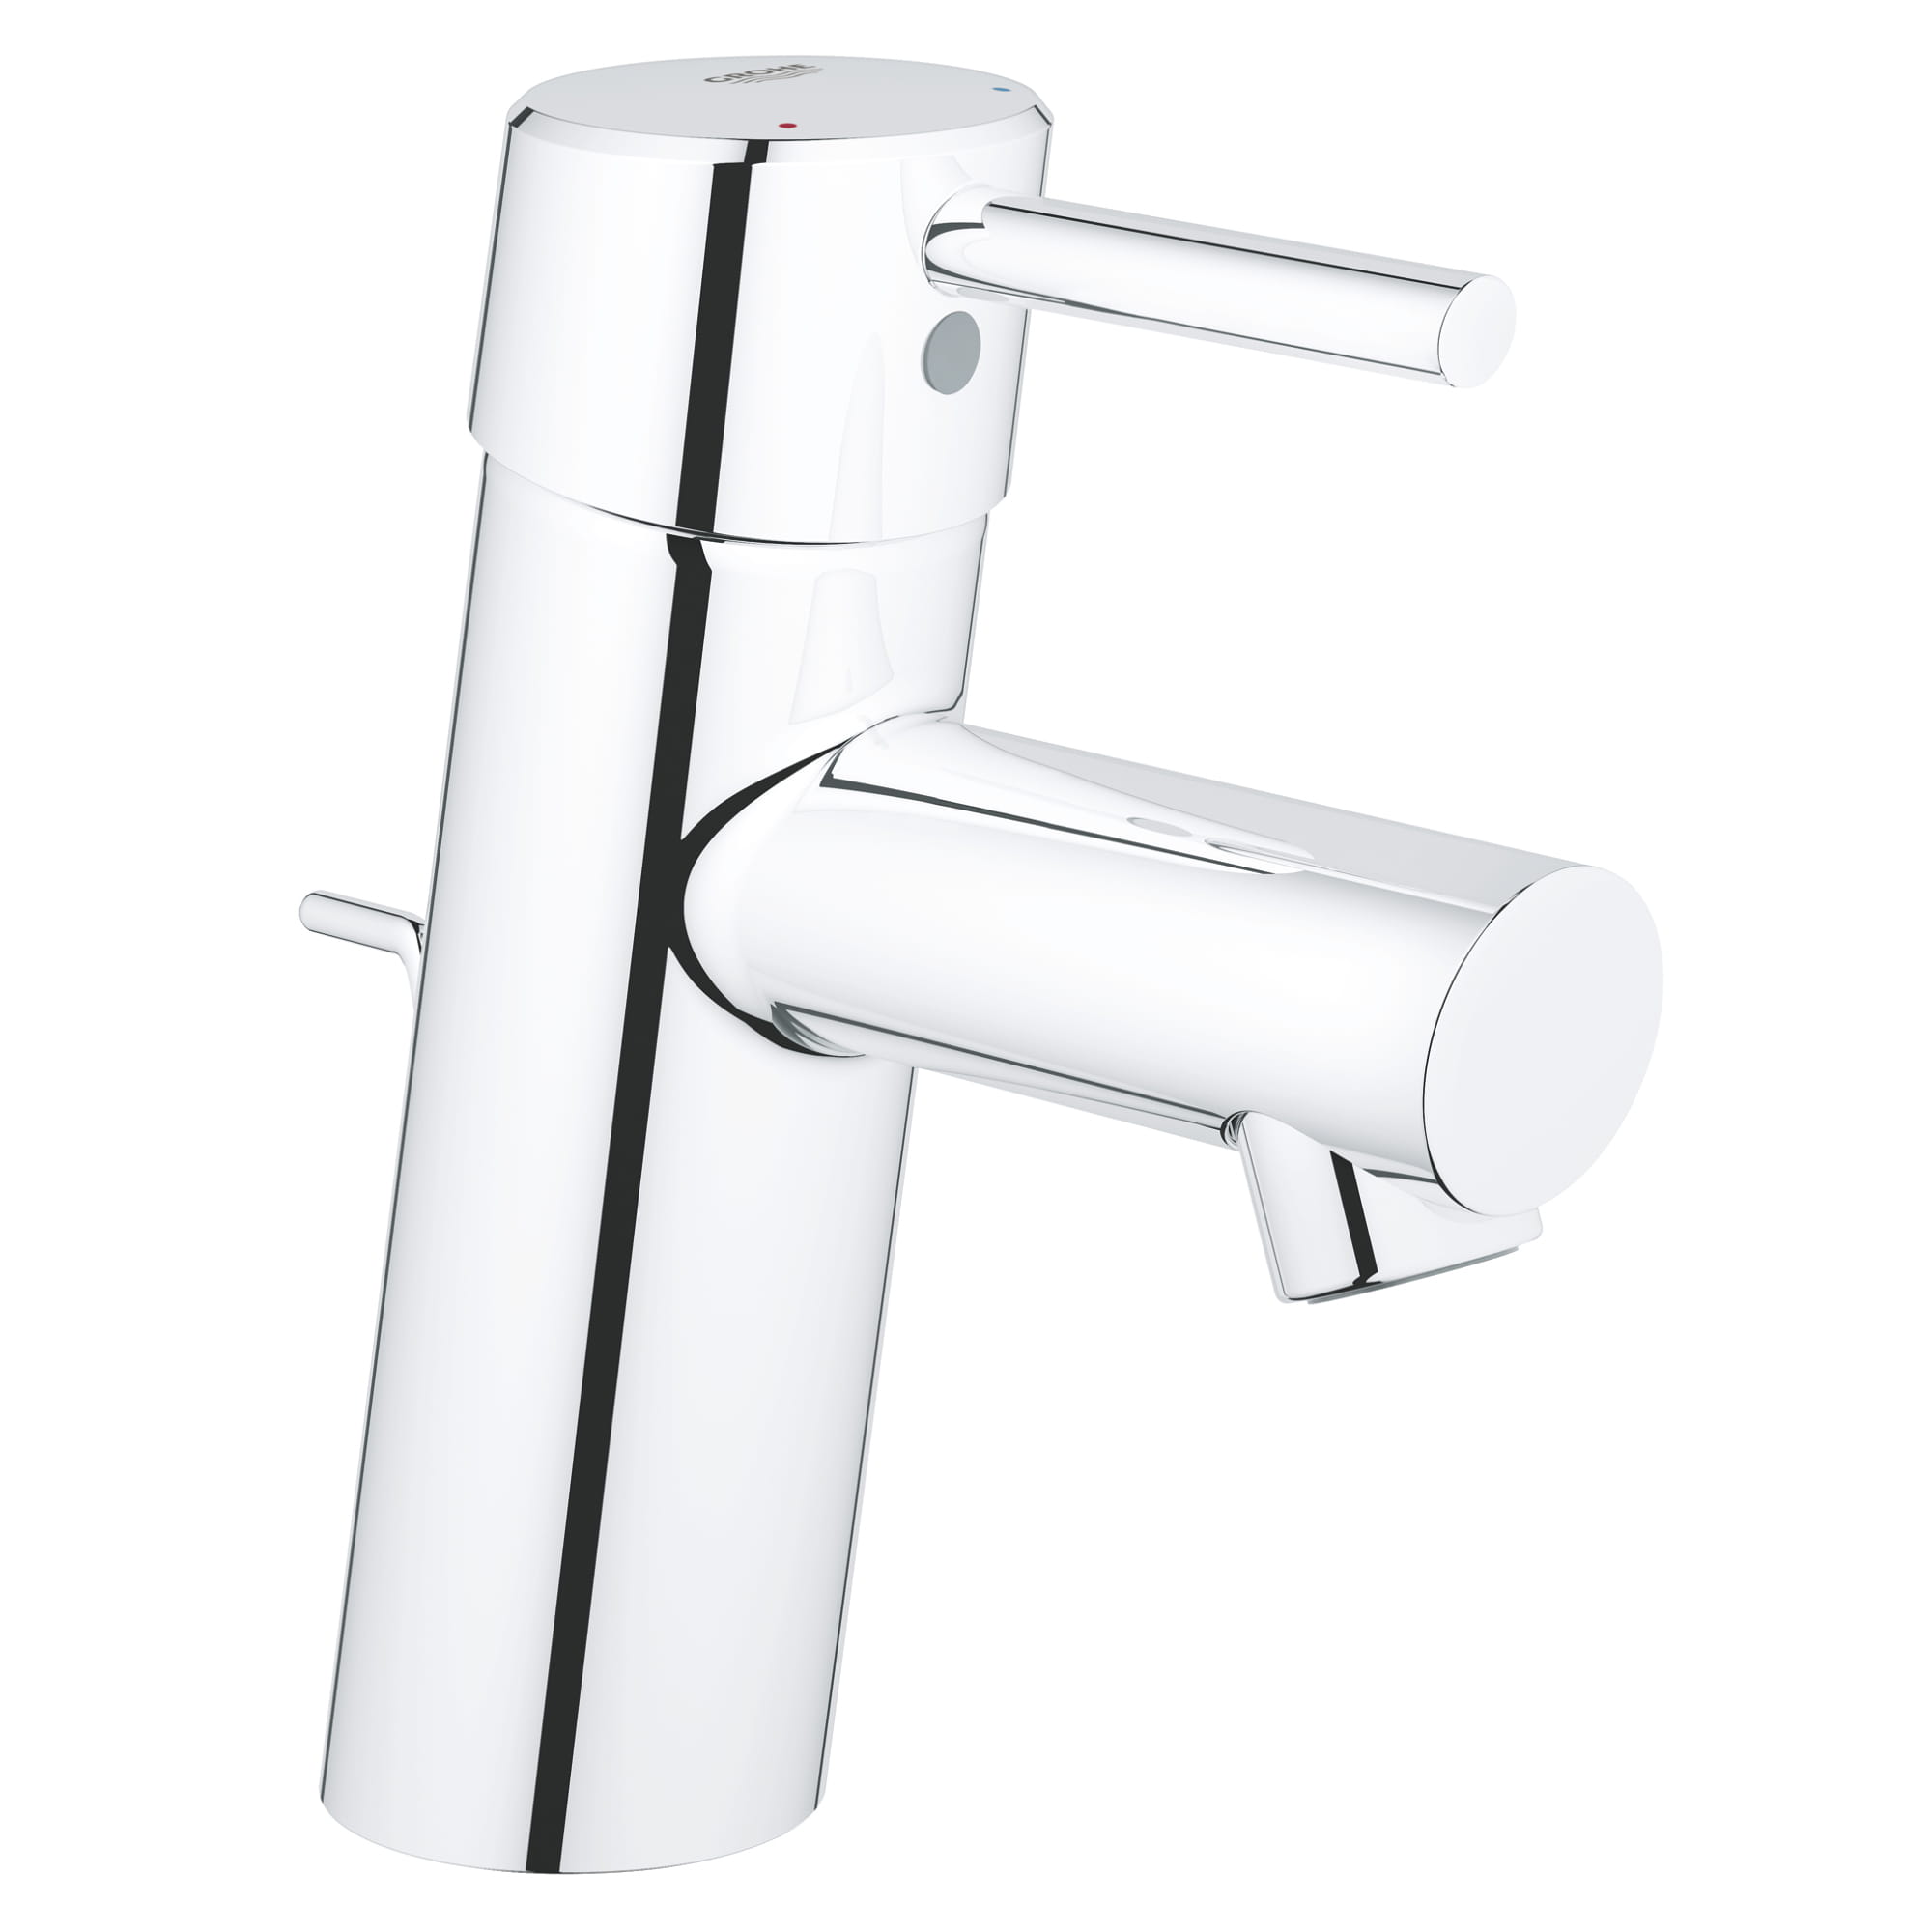 SINGLE HOLE SINGLE-HANDLE S-SIZE BATHROOM FAUCET 1.2 GPM-related